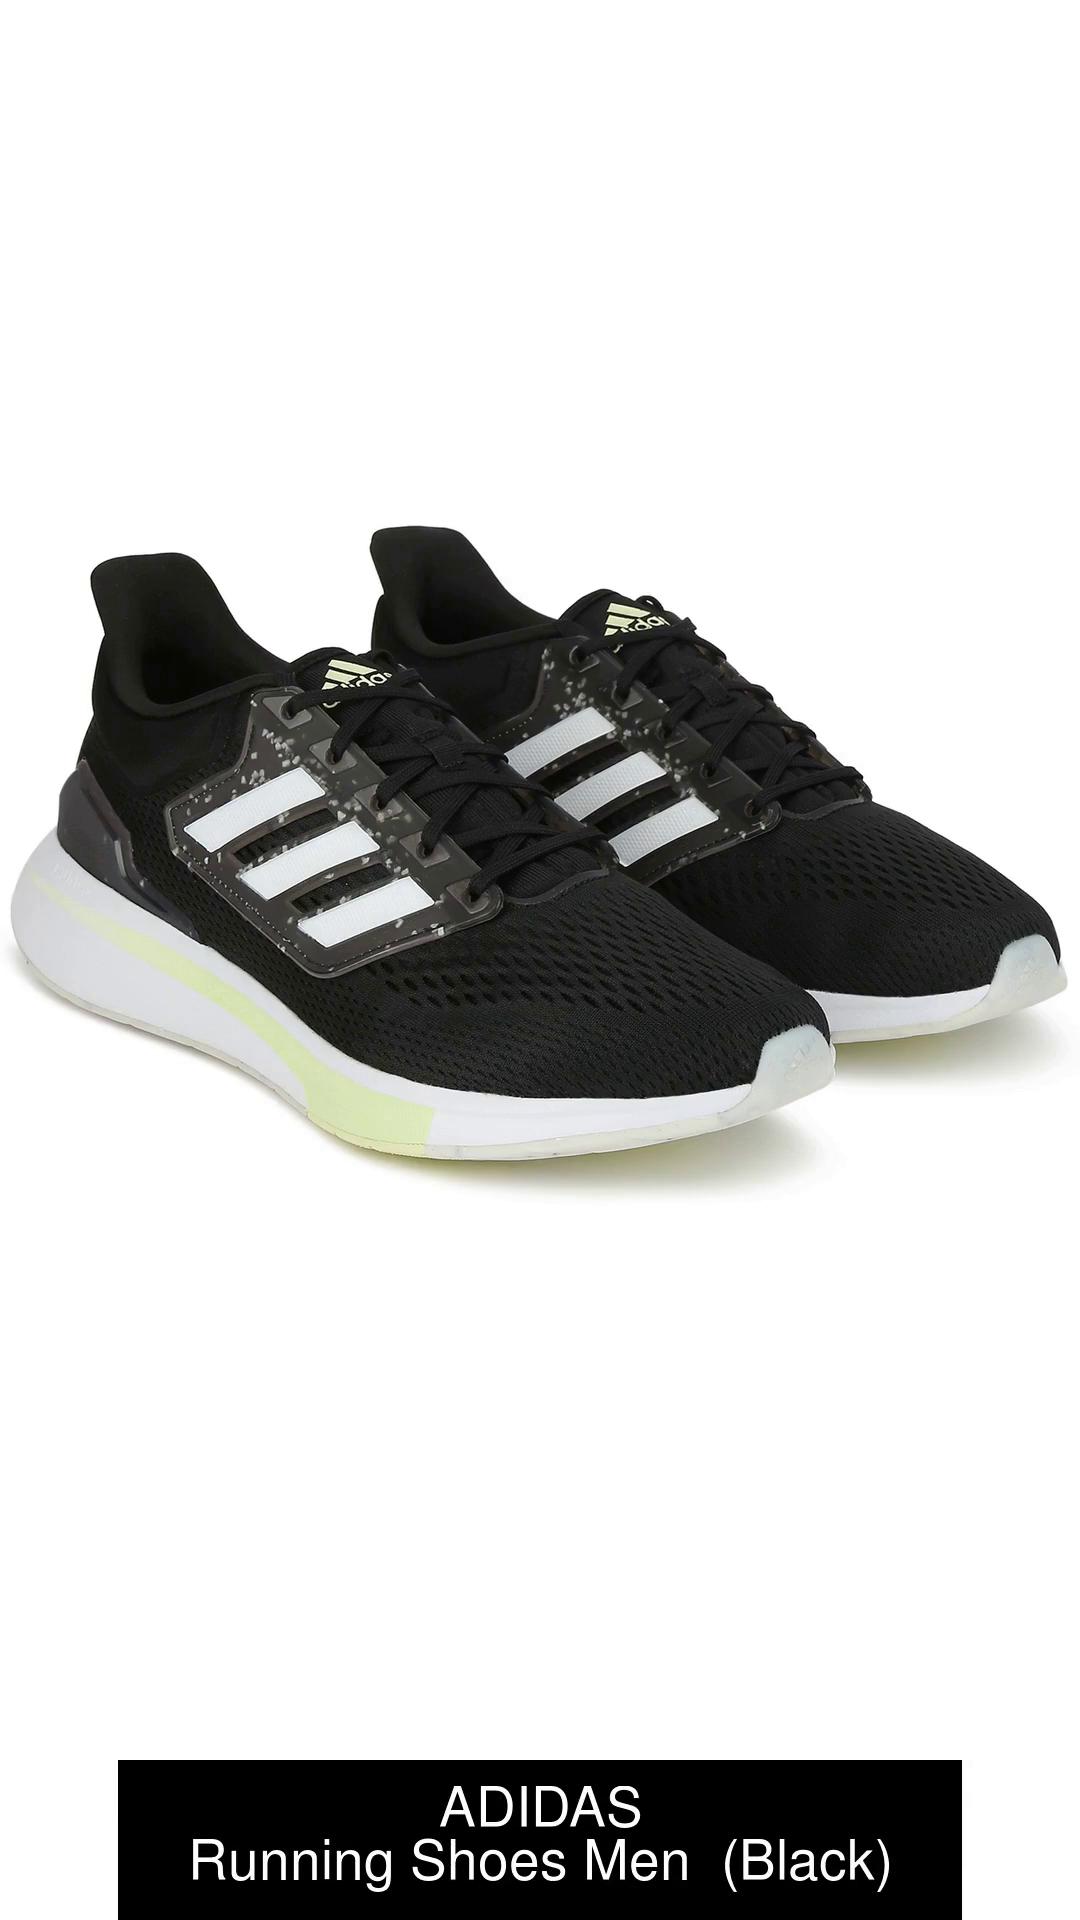 Adidas EQ21 Bounce shoes at Rs 2300/pair, Shoes in Pune